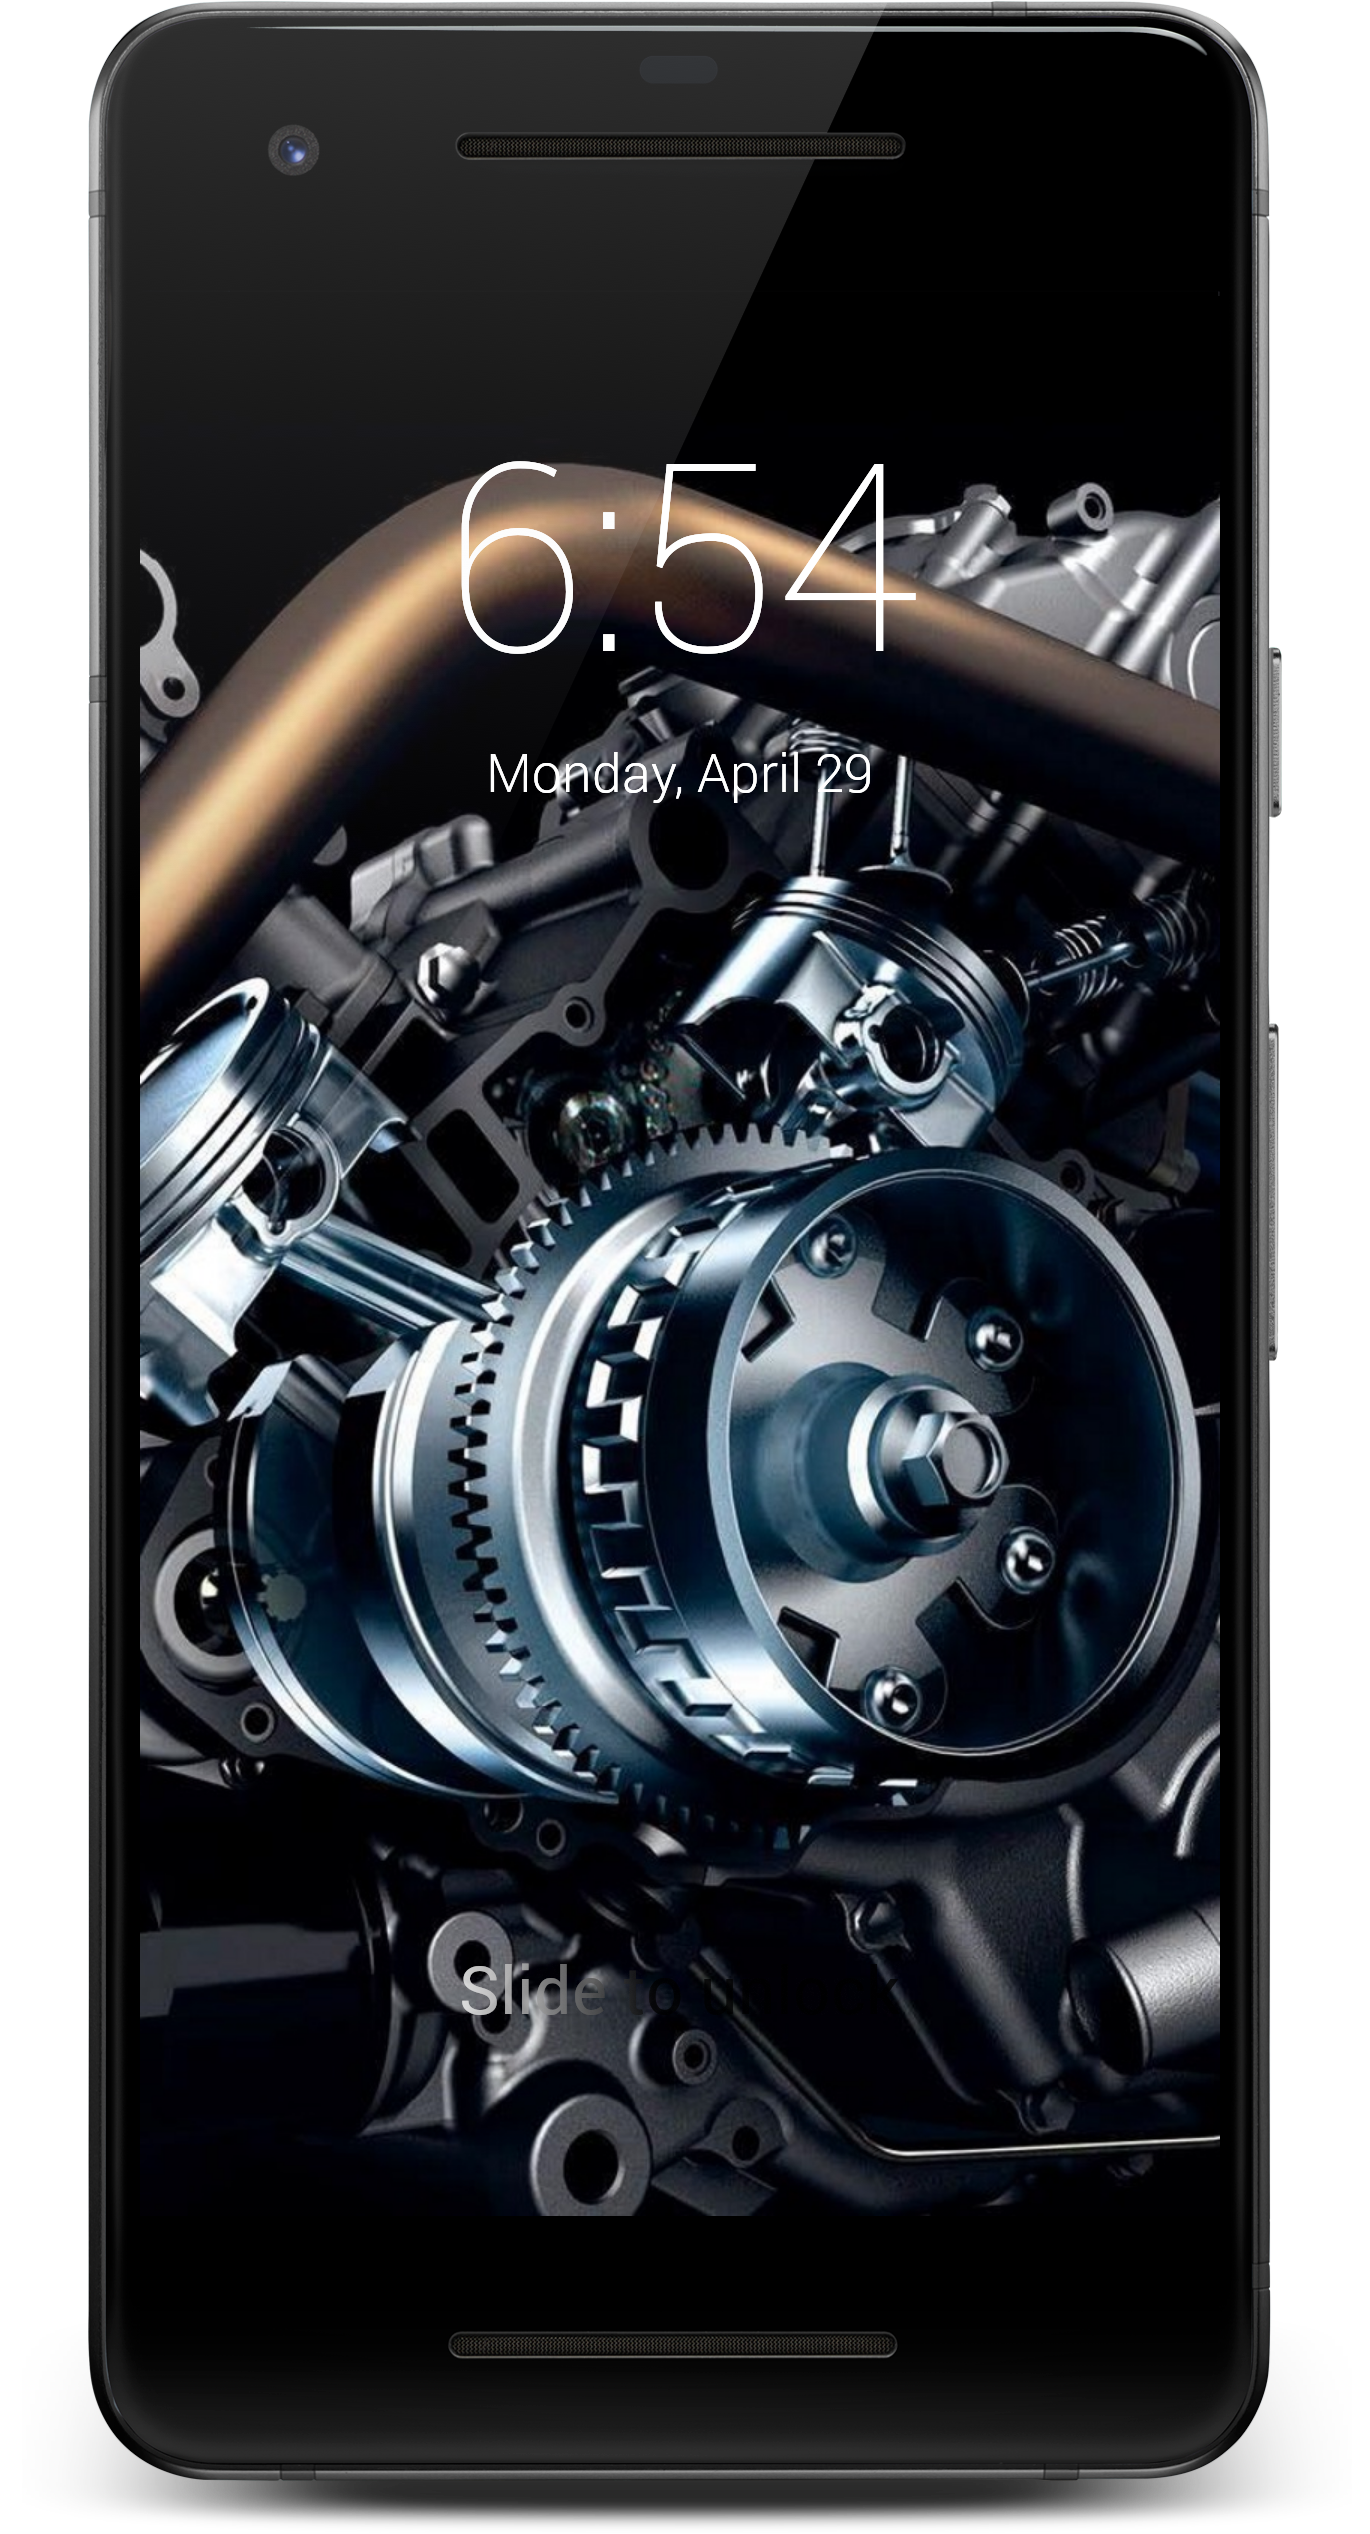 Car Engine HD Lock Screen for Android - APK Download - 